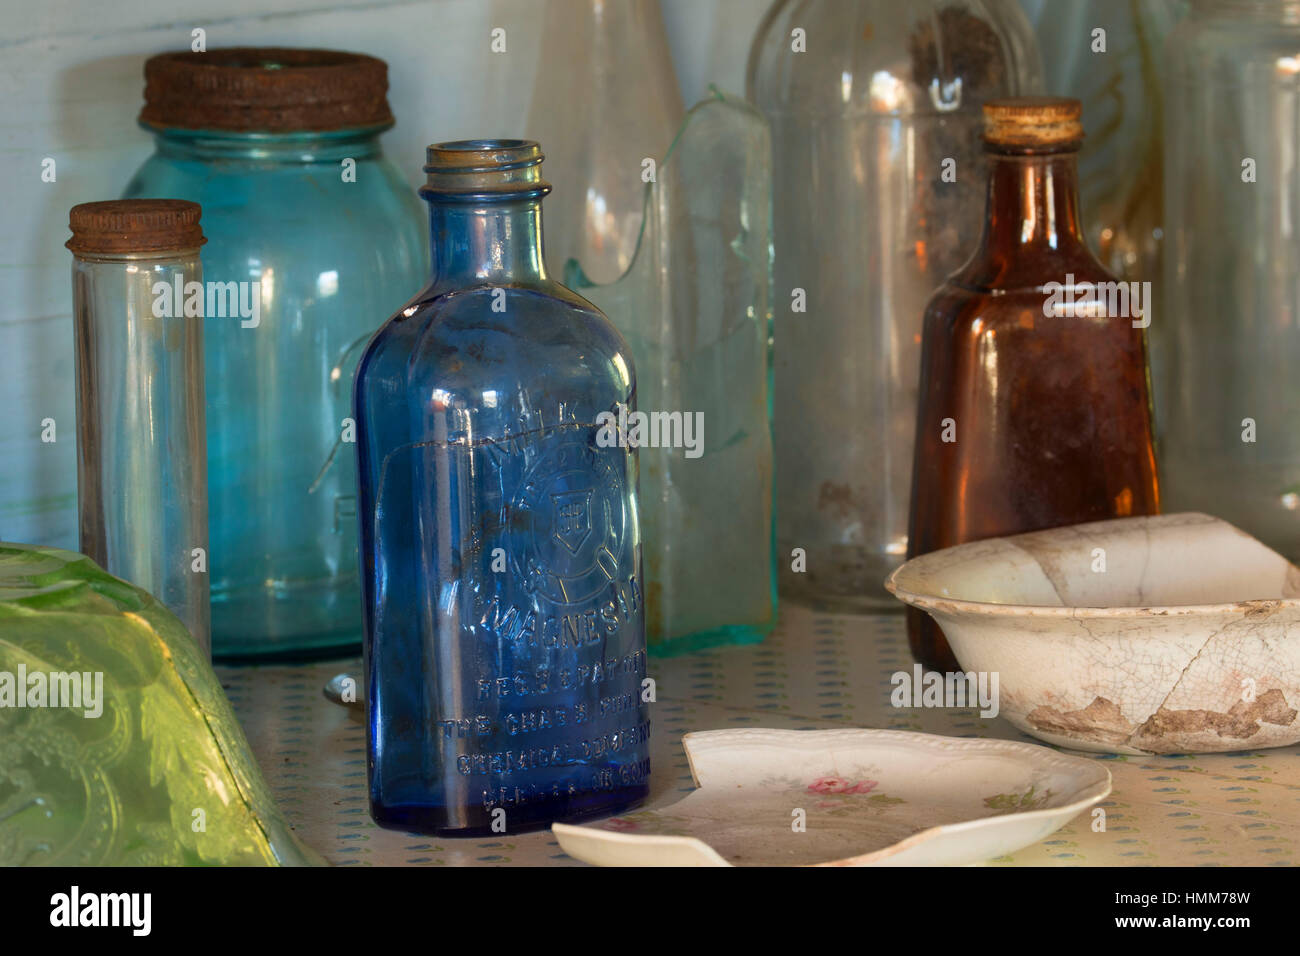 Bottles and jars, Riddle Brothers Ranch National Historic District, Donner und Blitzen Wild and Scenic River, Steens Mountain Cooperative Management a Stock Photo